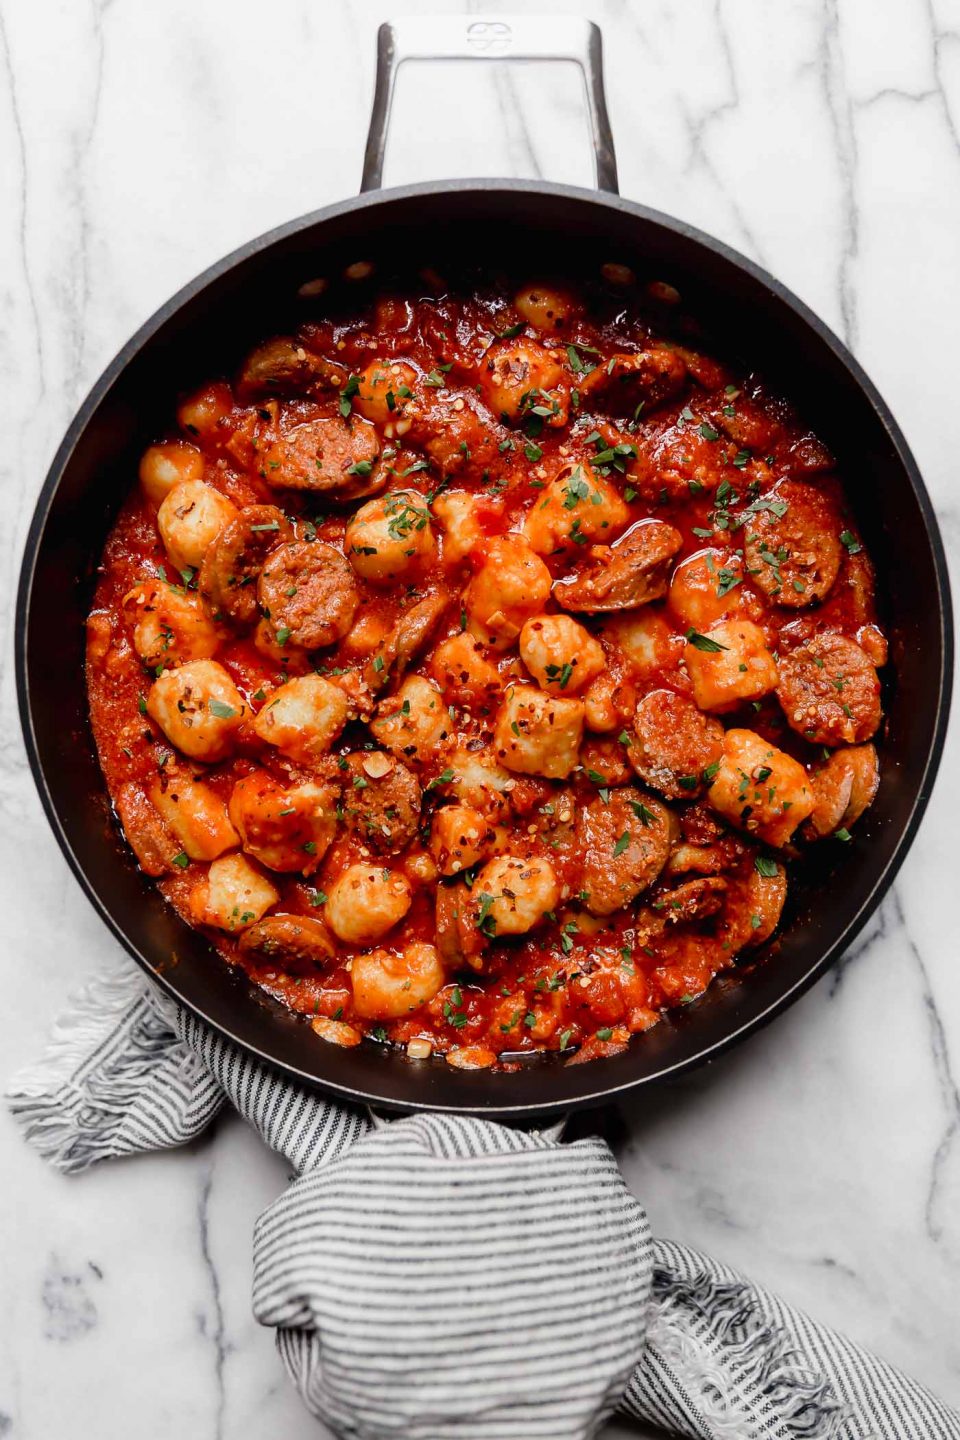 Gnocchi all'Amatriciana, with sliced Italian sausage in a black skillet. A striped linen is wrapped around the skillet handle. The skillet is on a white marble surface.